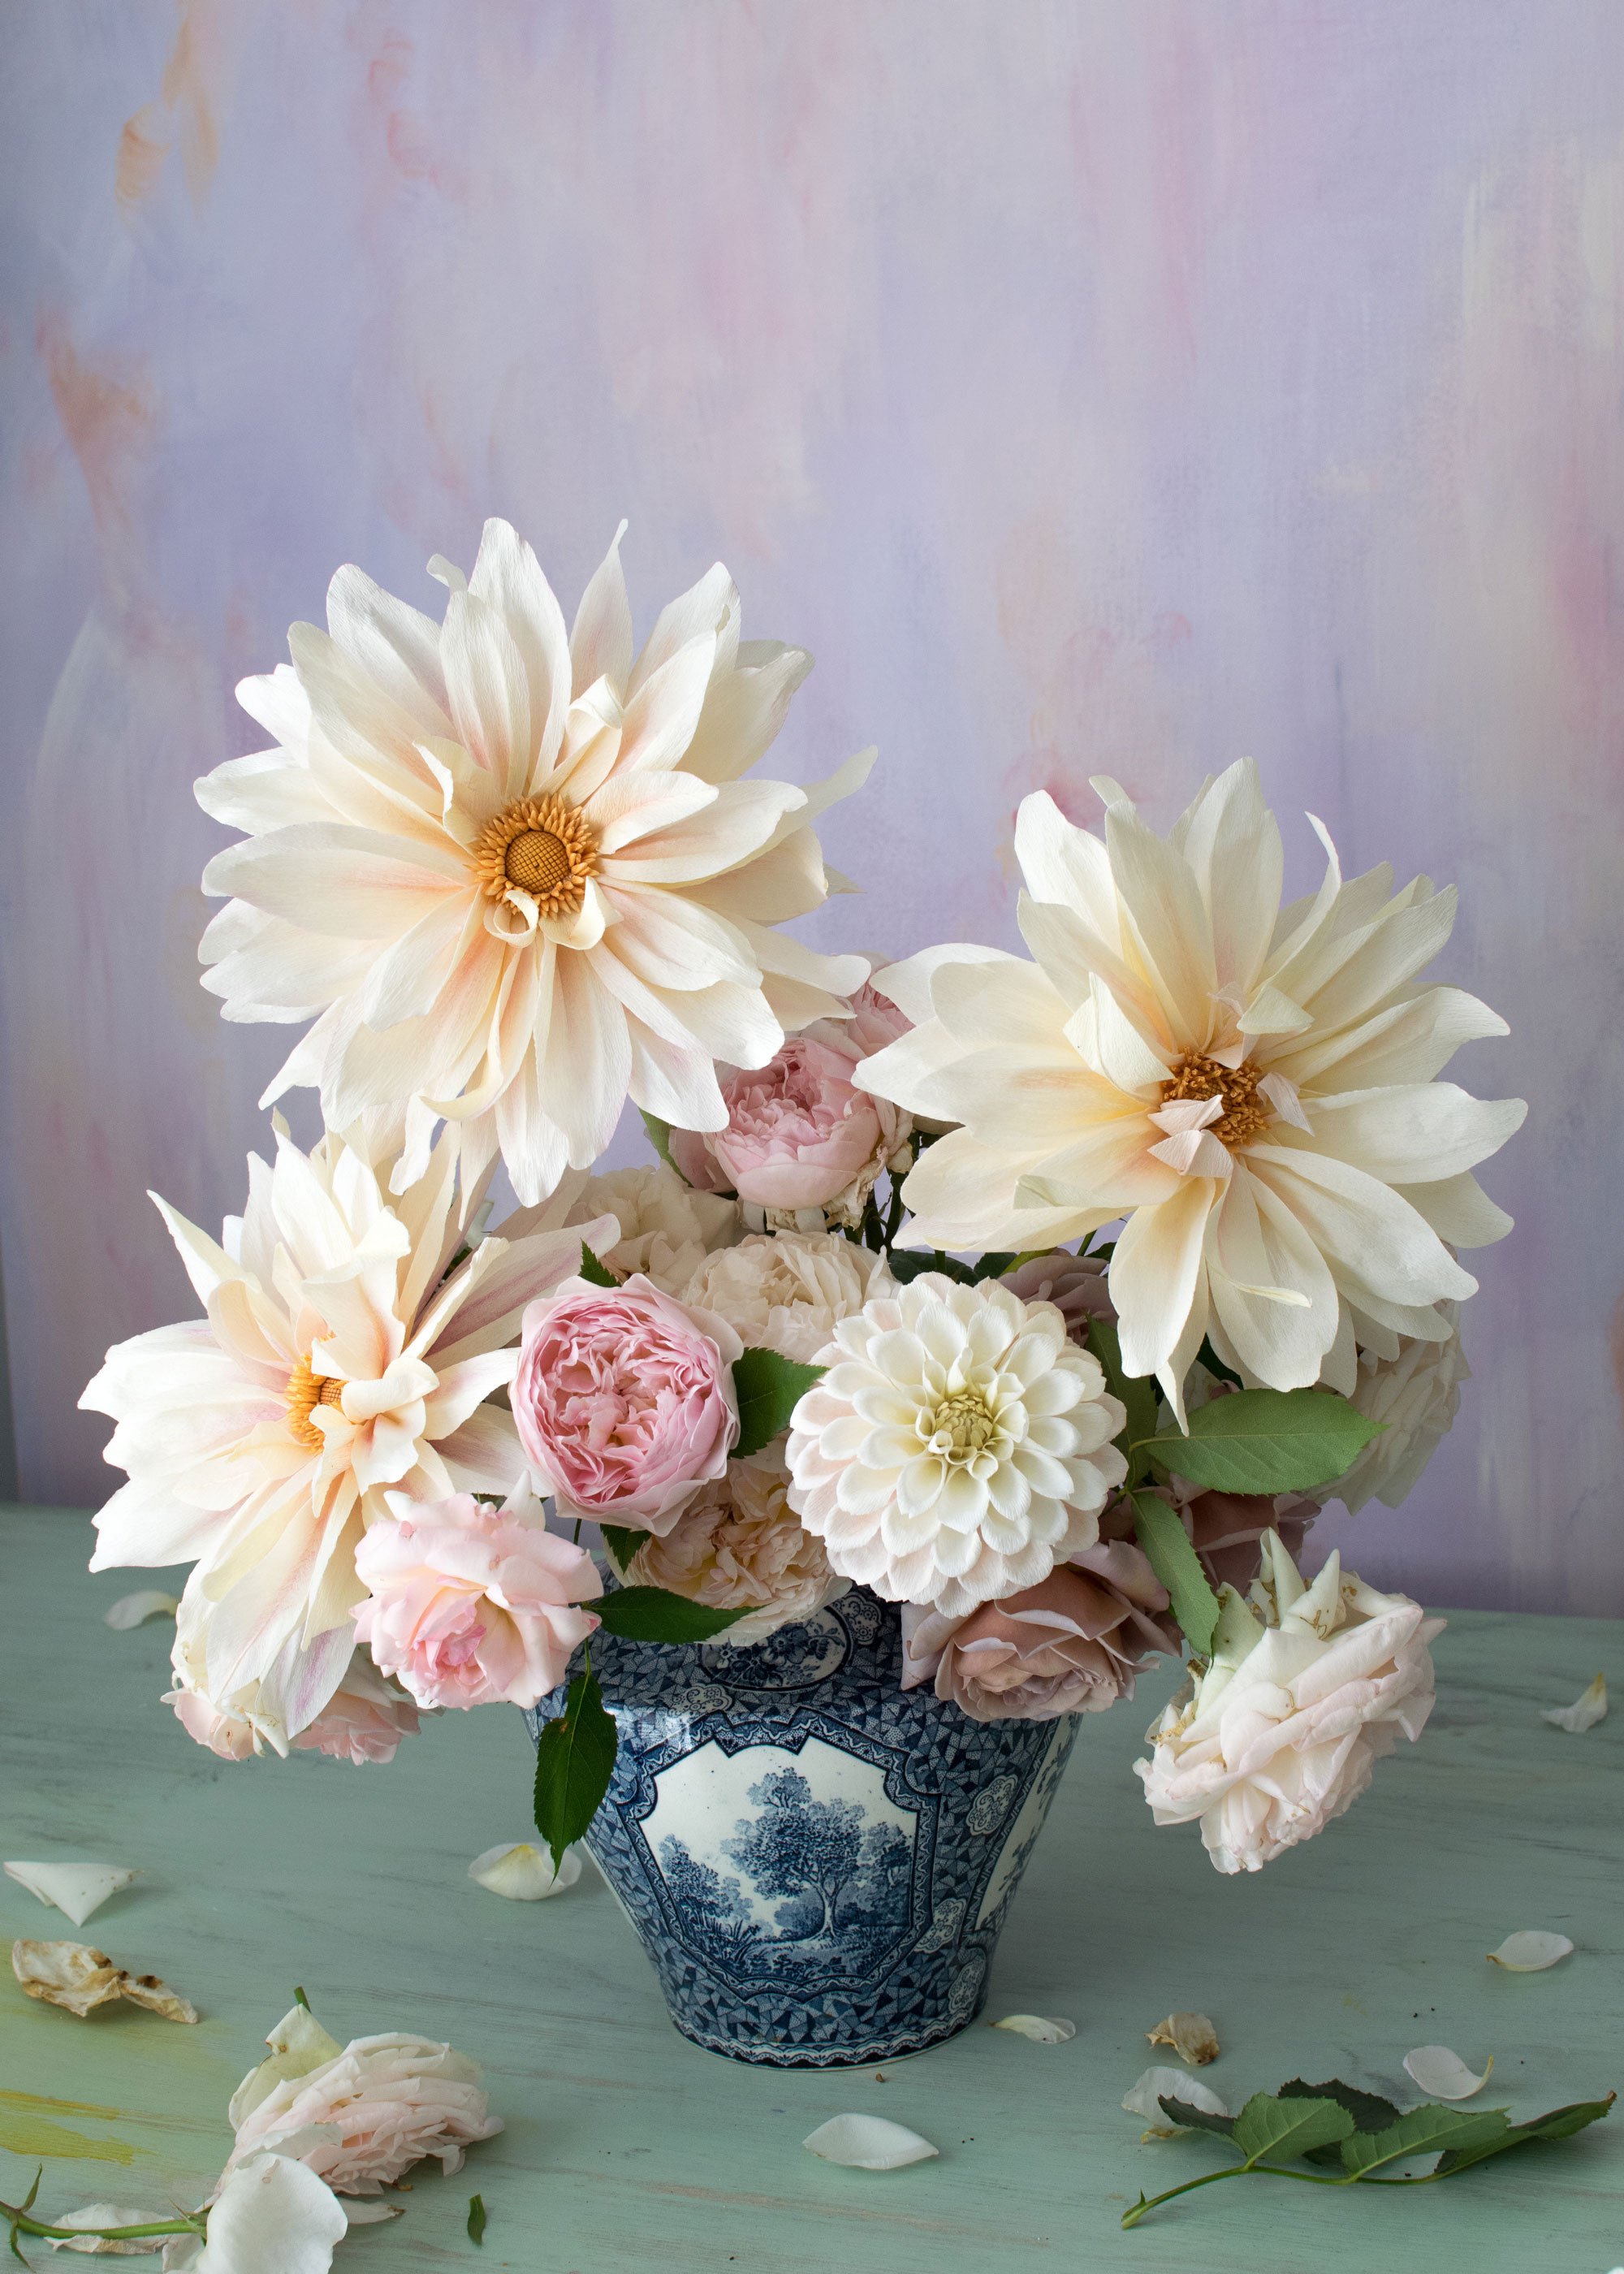 Cafe-au-Lait-Dahlia-(in-Paper)-and-Roses-Arrangement-by-Crafted-to-Bloom-#paperflowers-(pink-bg-looking-down).jpg